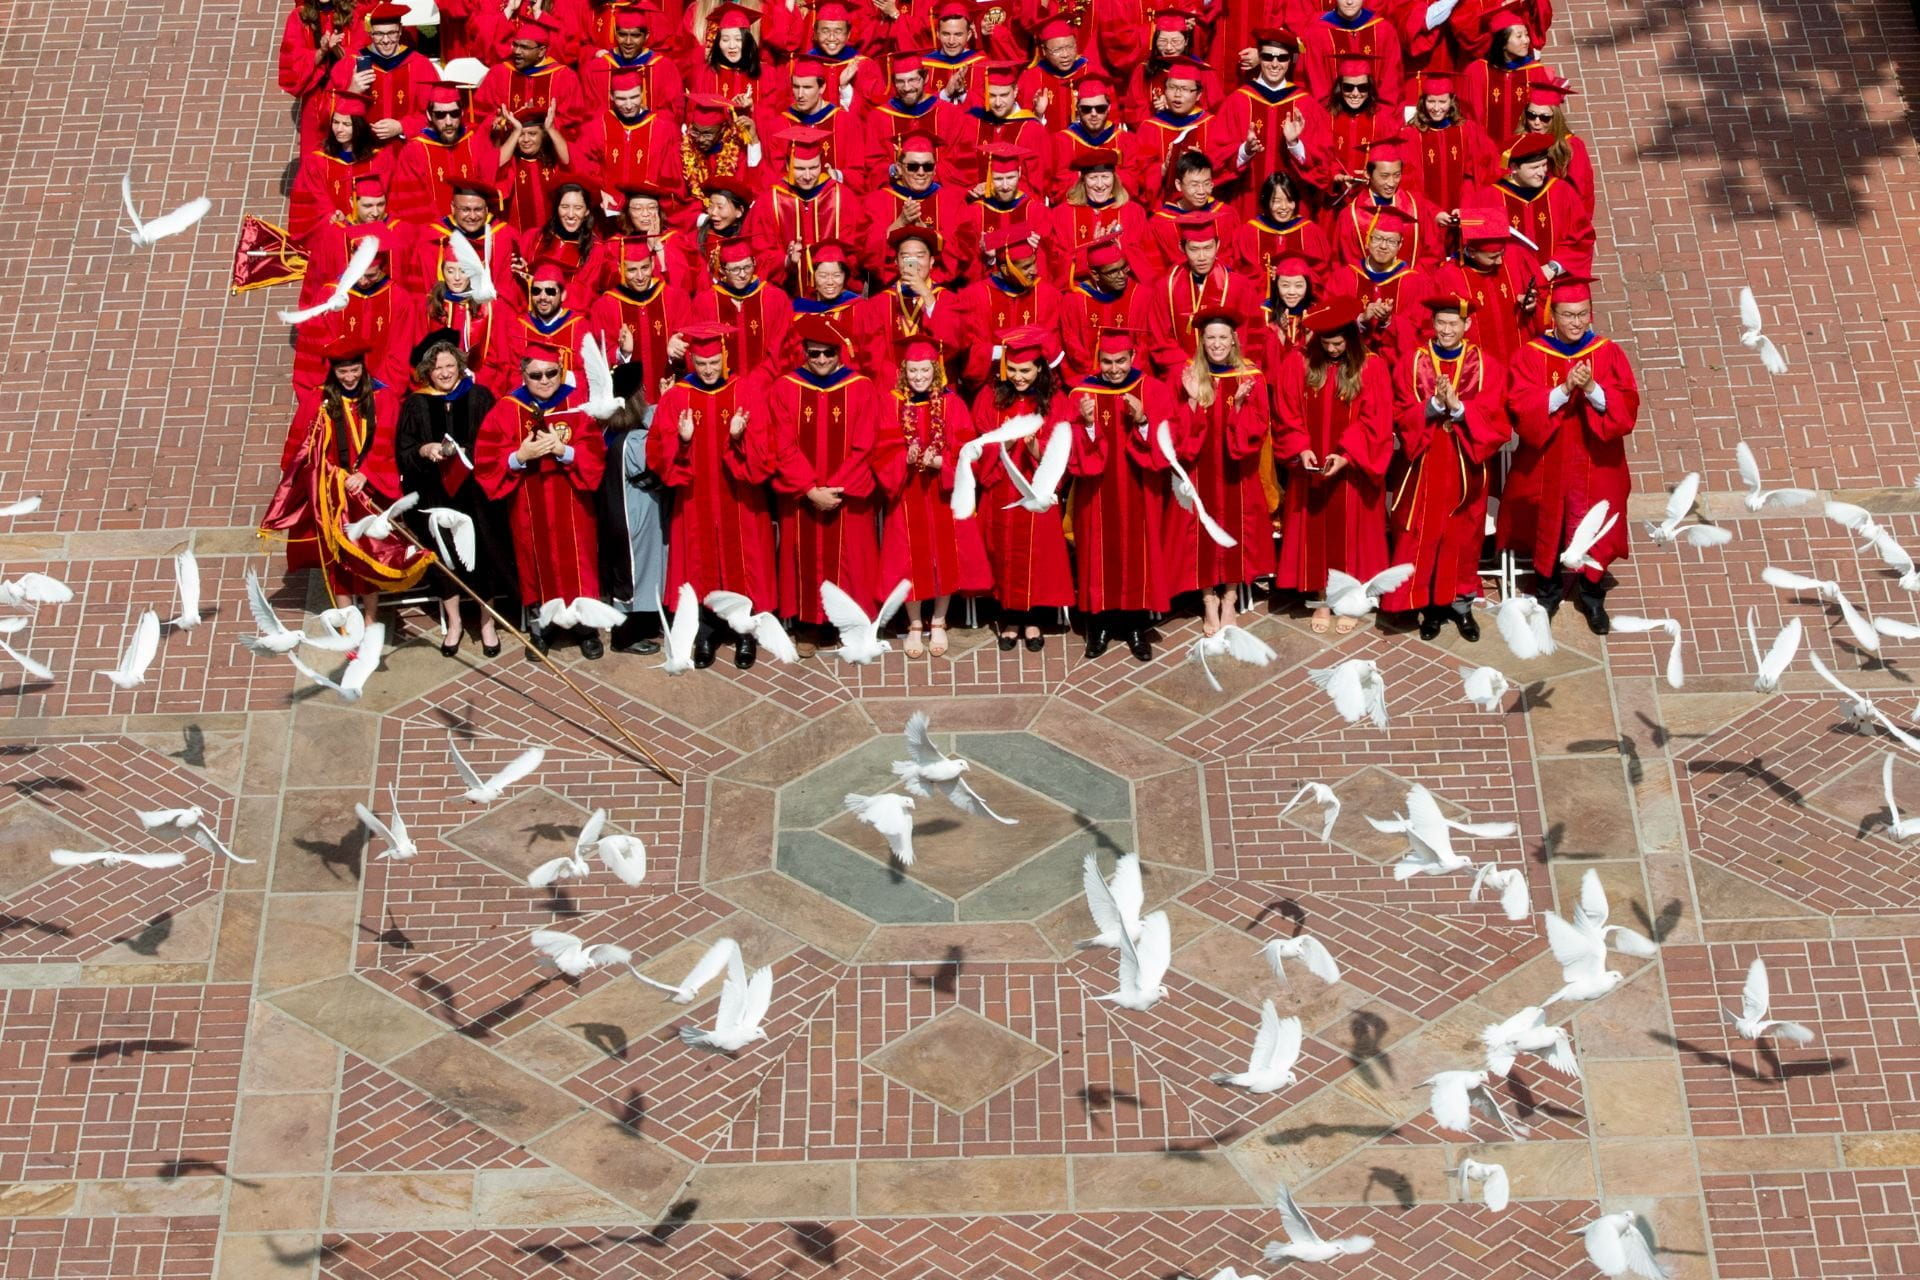 A flock of doves flying over the USC graduating class, who are all in red gowns and caps.